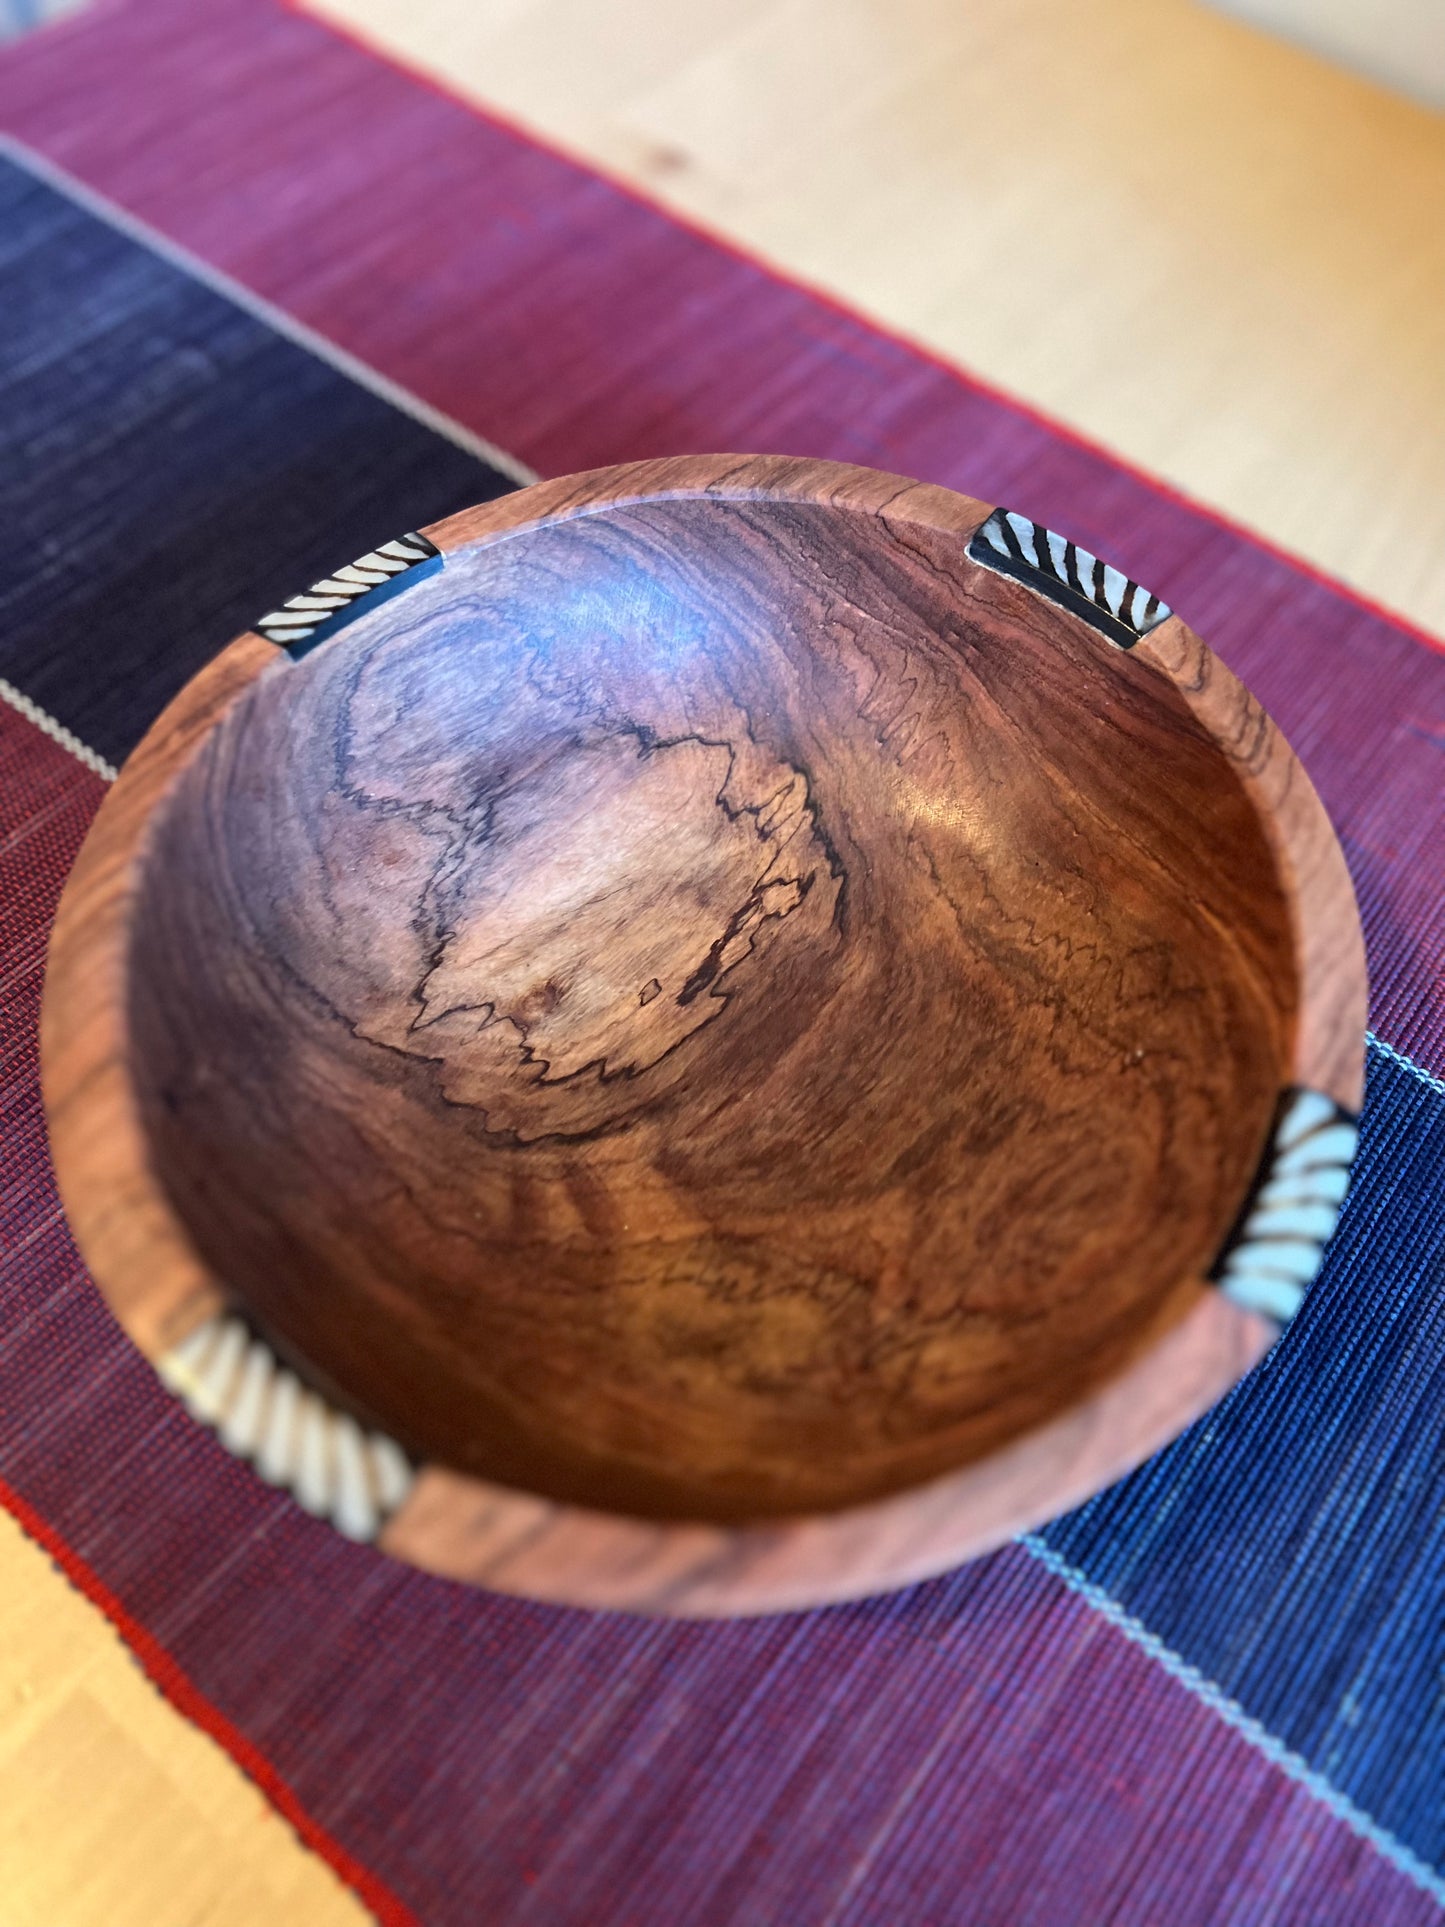 Hand Carved Bowl with Bone Inlay